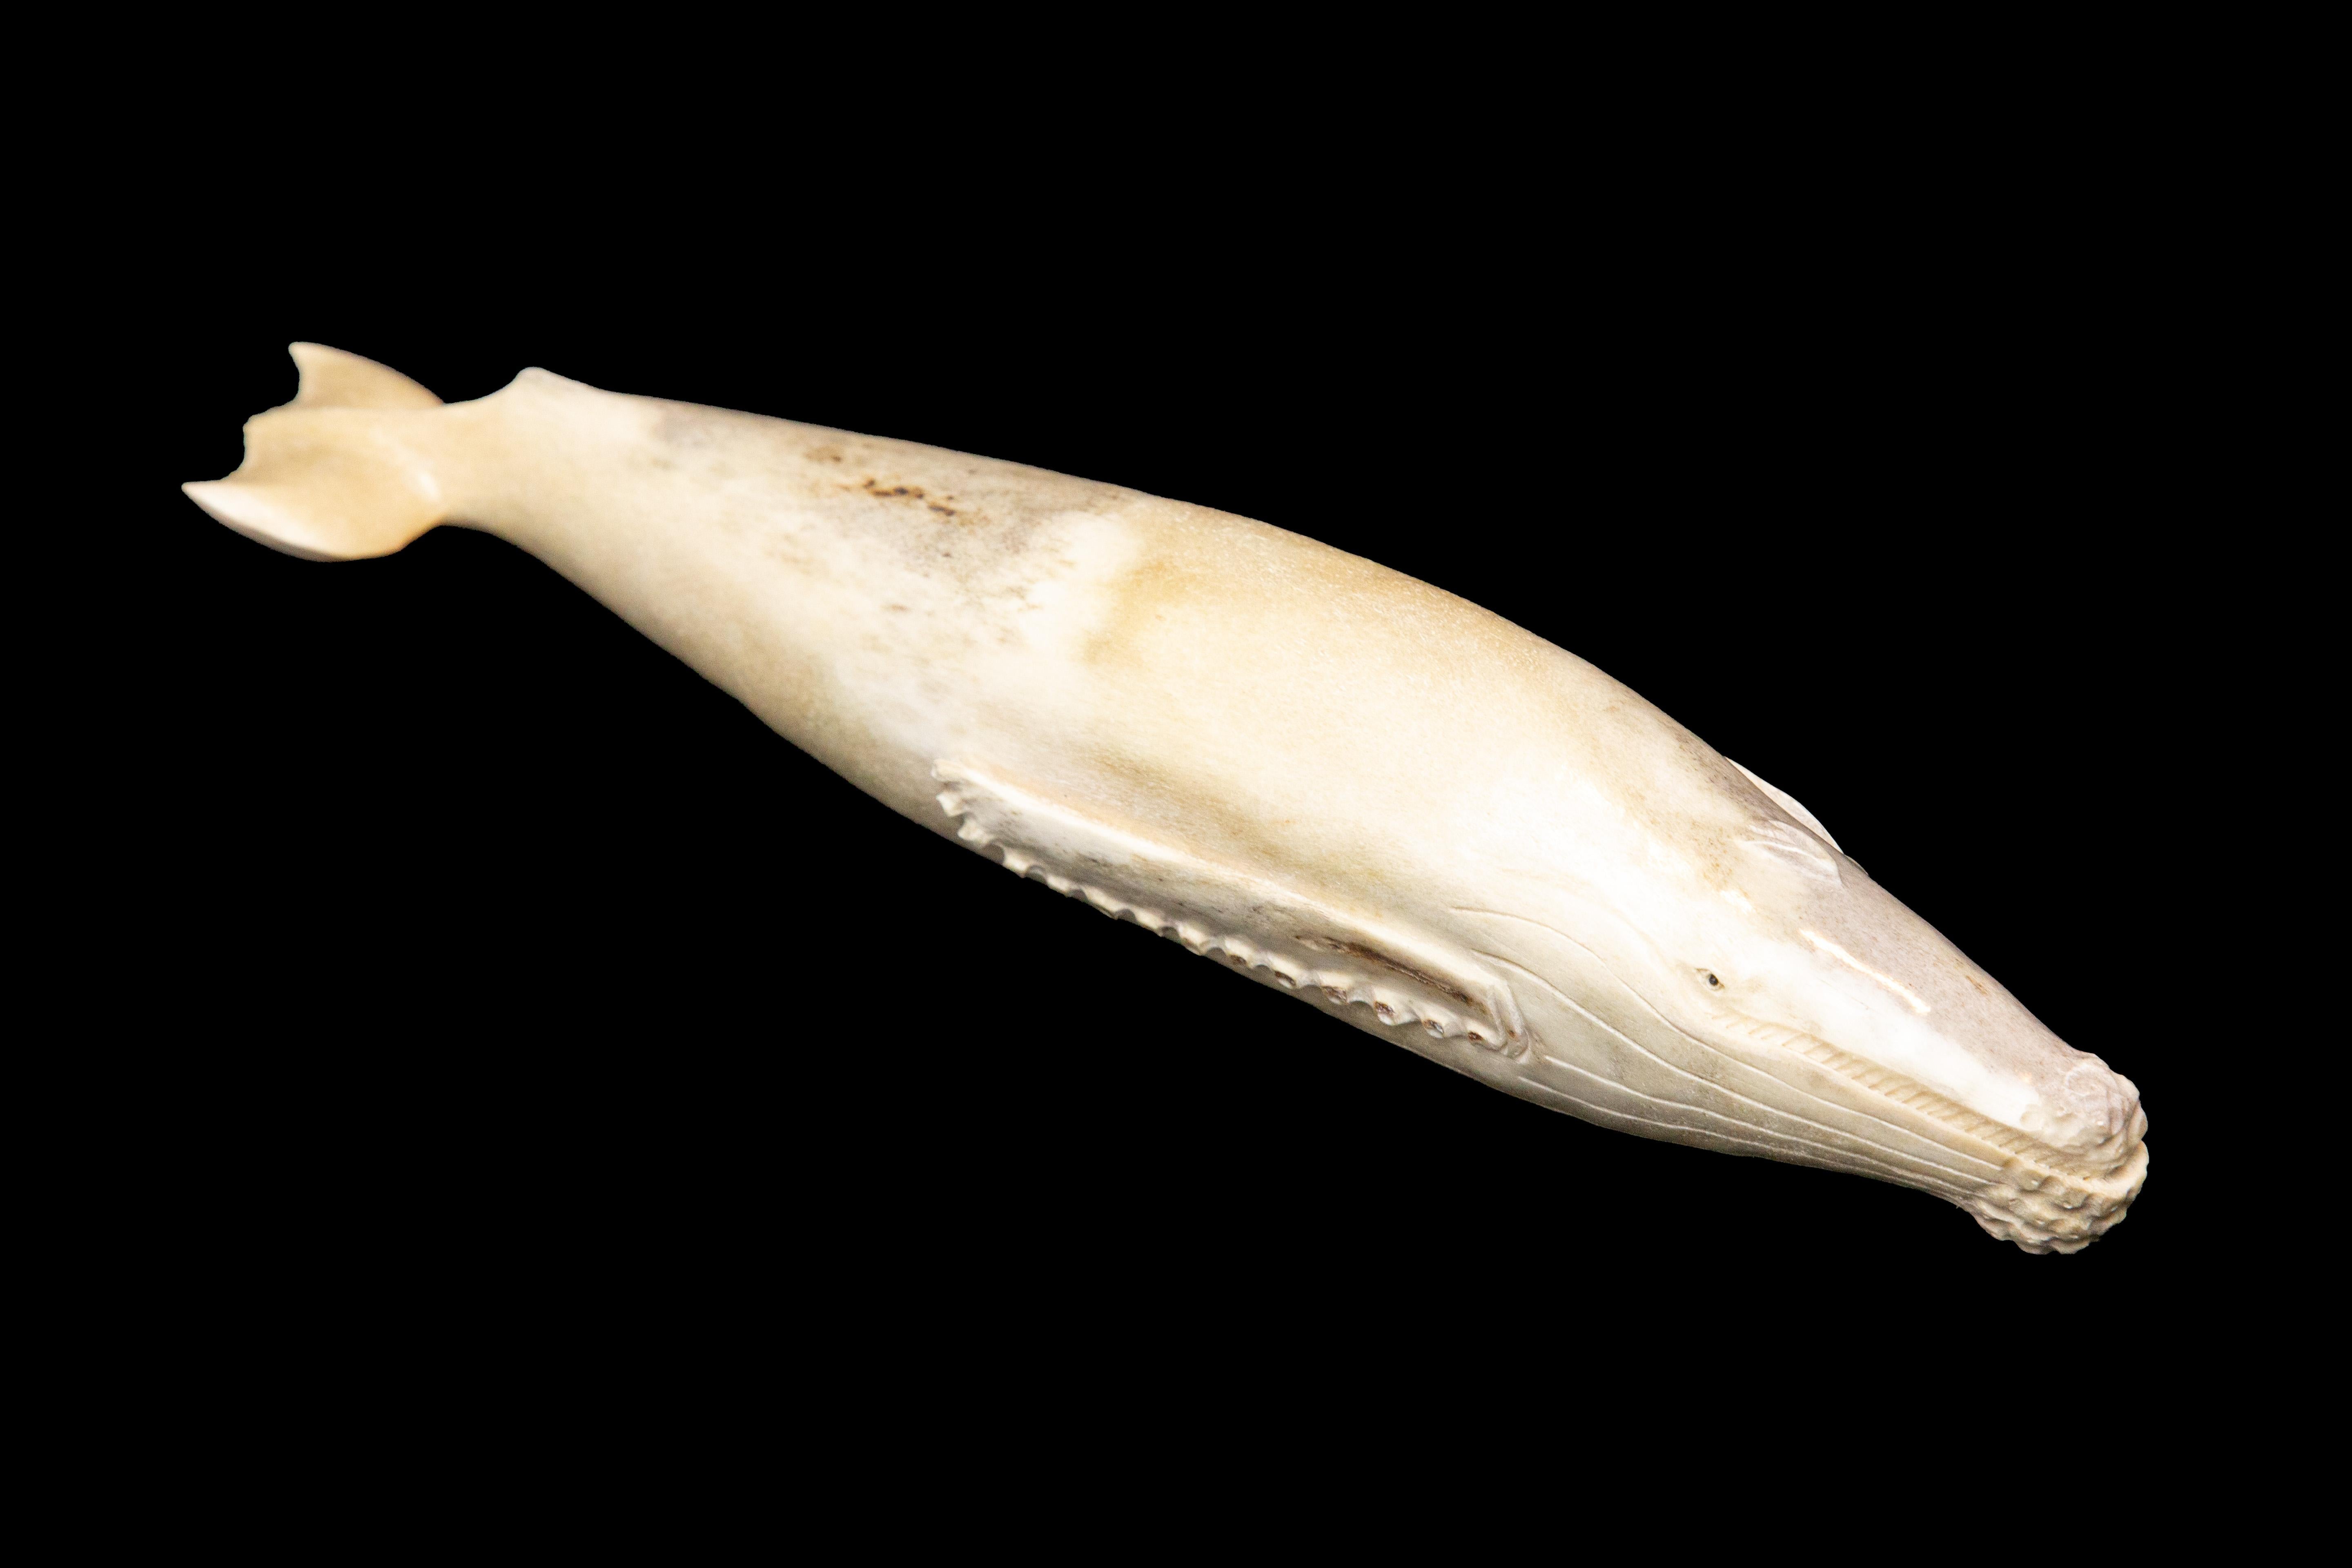 Carved Moose Antler Whale

The moose antler was sourced in North America and carved in Indonesia. Quality of ivory, but with sustainability, as the moose naturally shed their antlers.

Measures Approximately: 11.5